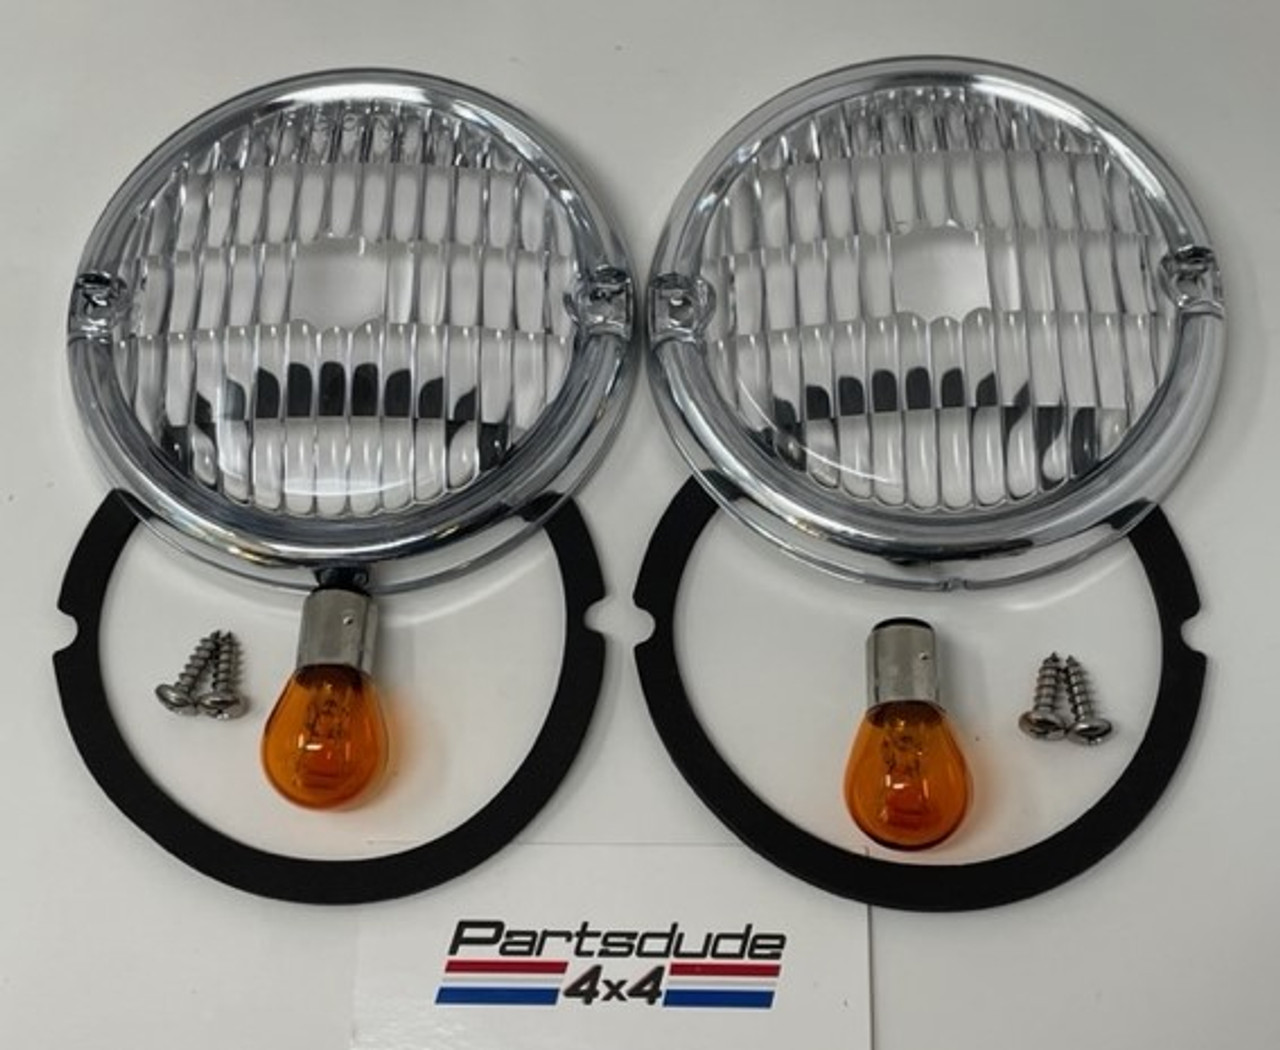 Front parking light master refresh kit, Jeep CJ5/7/8 with two hole lenses